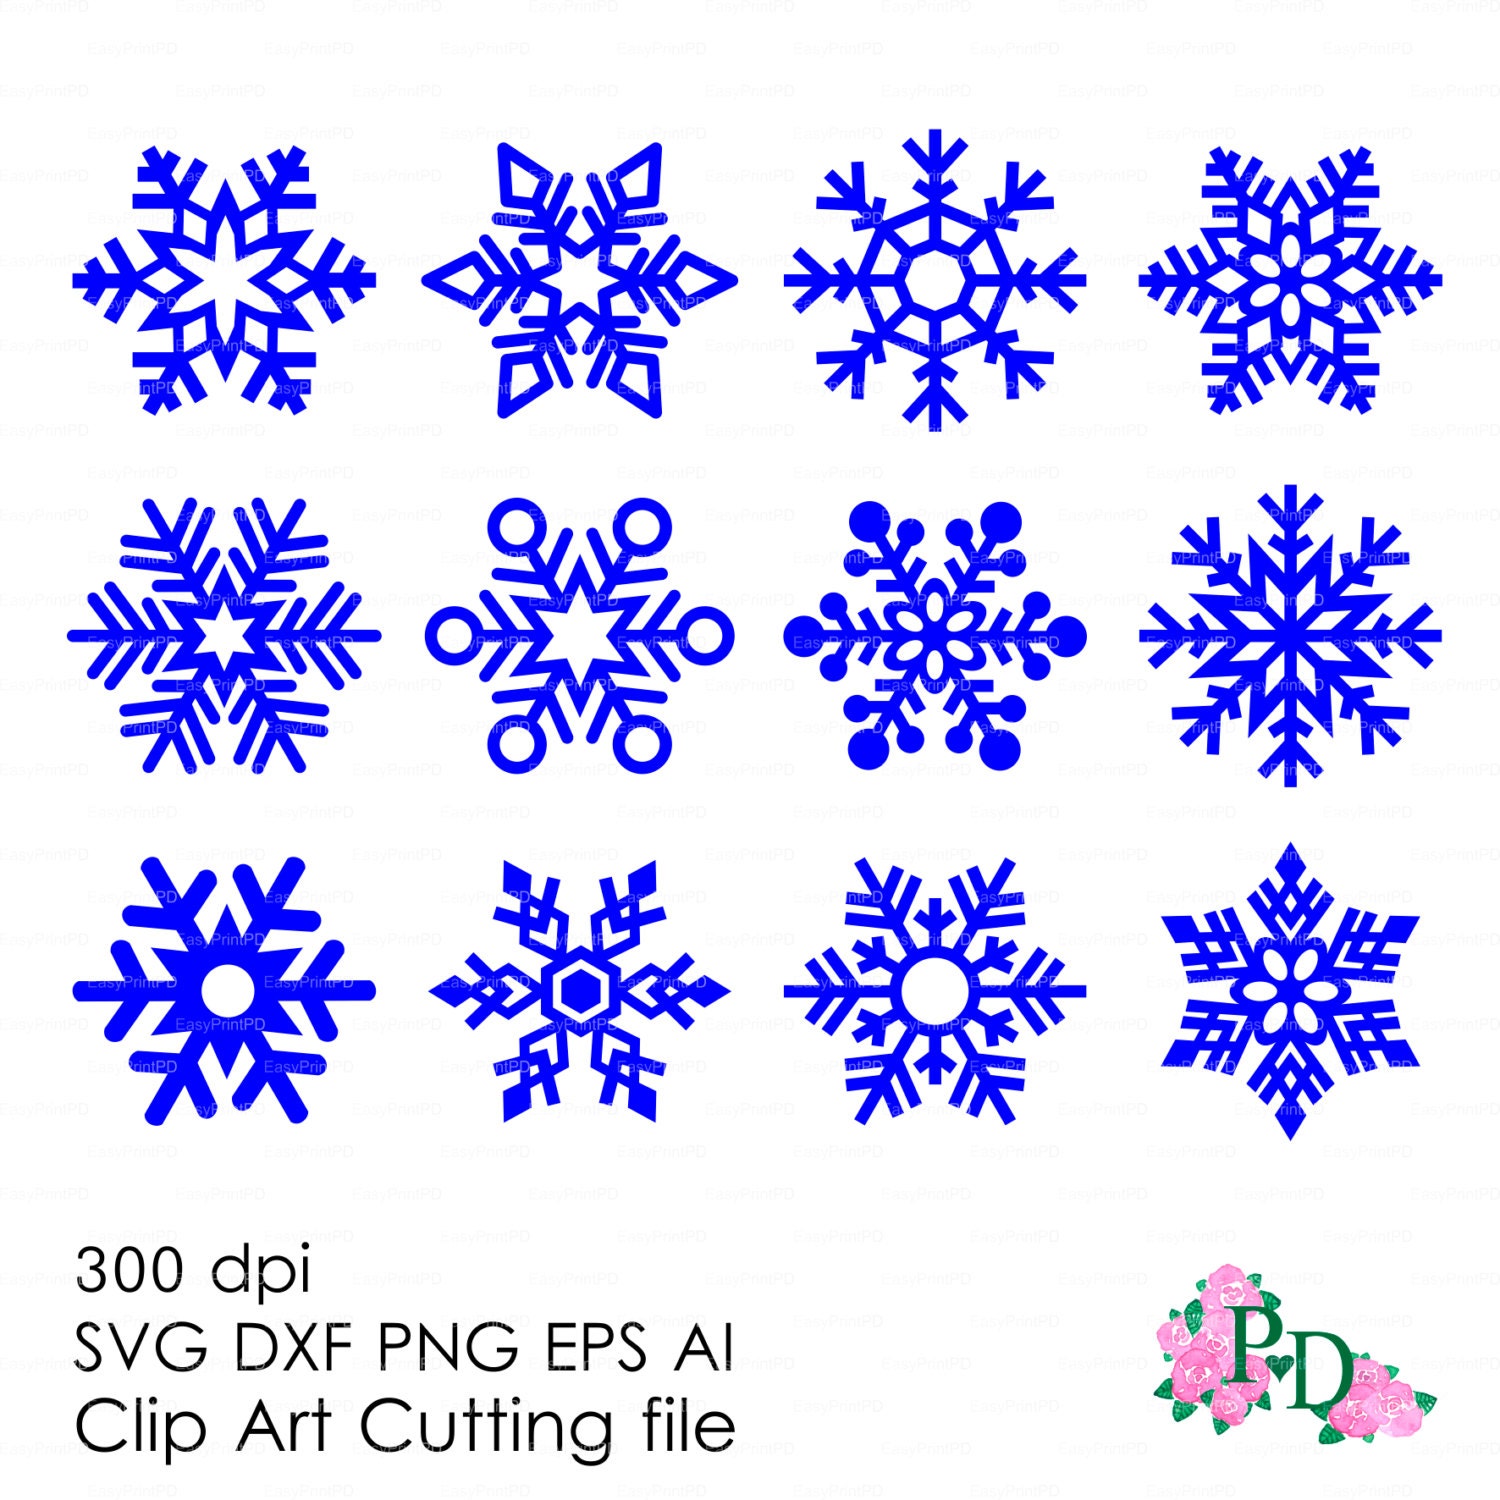 free vector embroidery clipart - photo #21